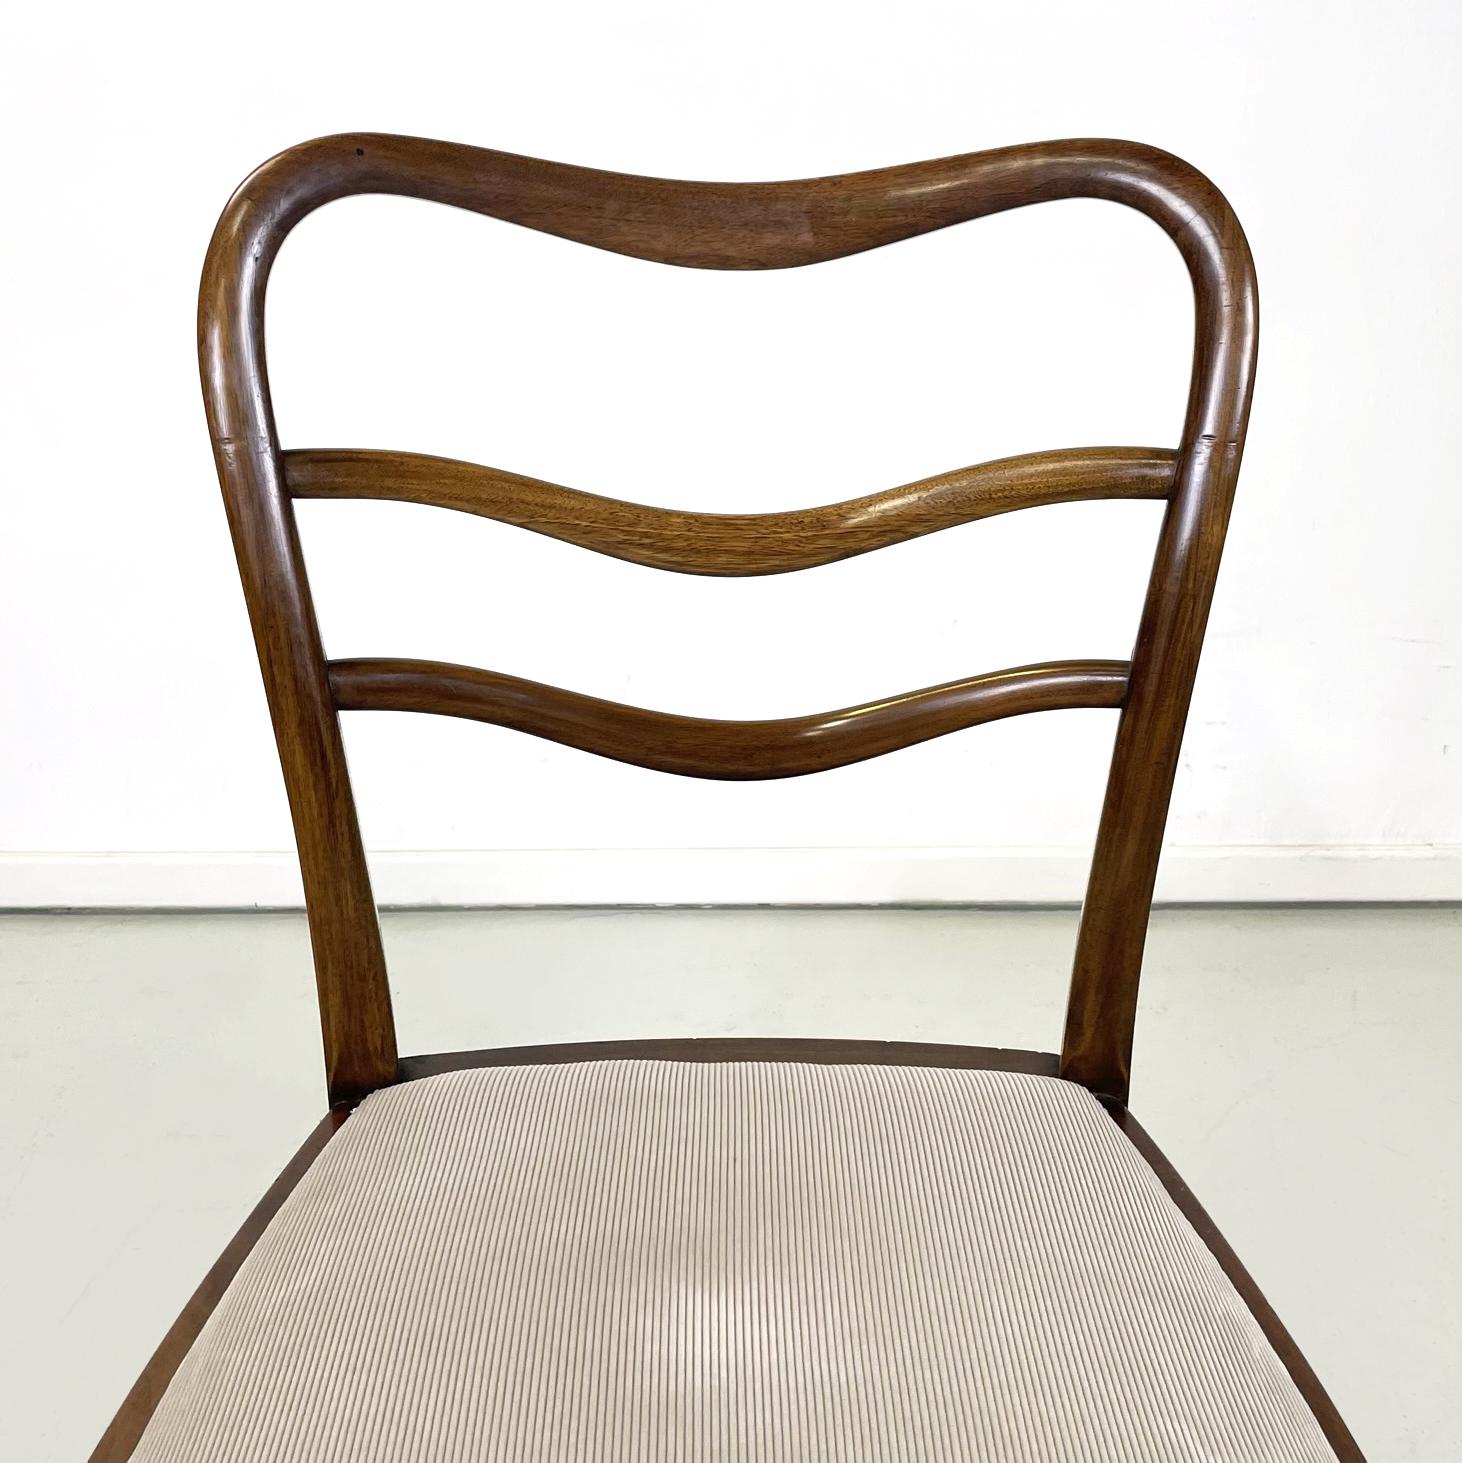 Hungary Art Deco Chairs in wood and beige corduroy velvet, 1930s For Sale 2